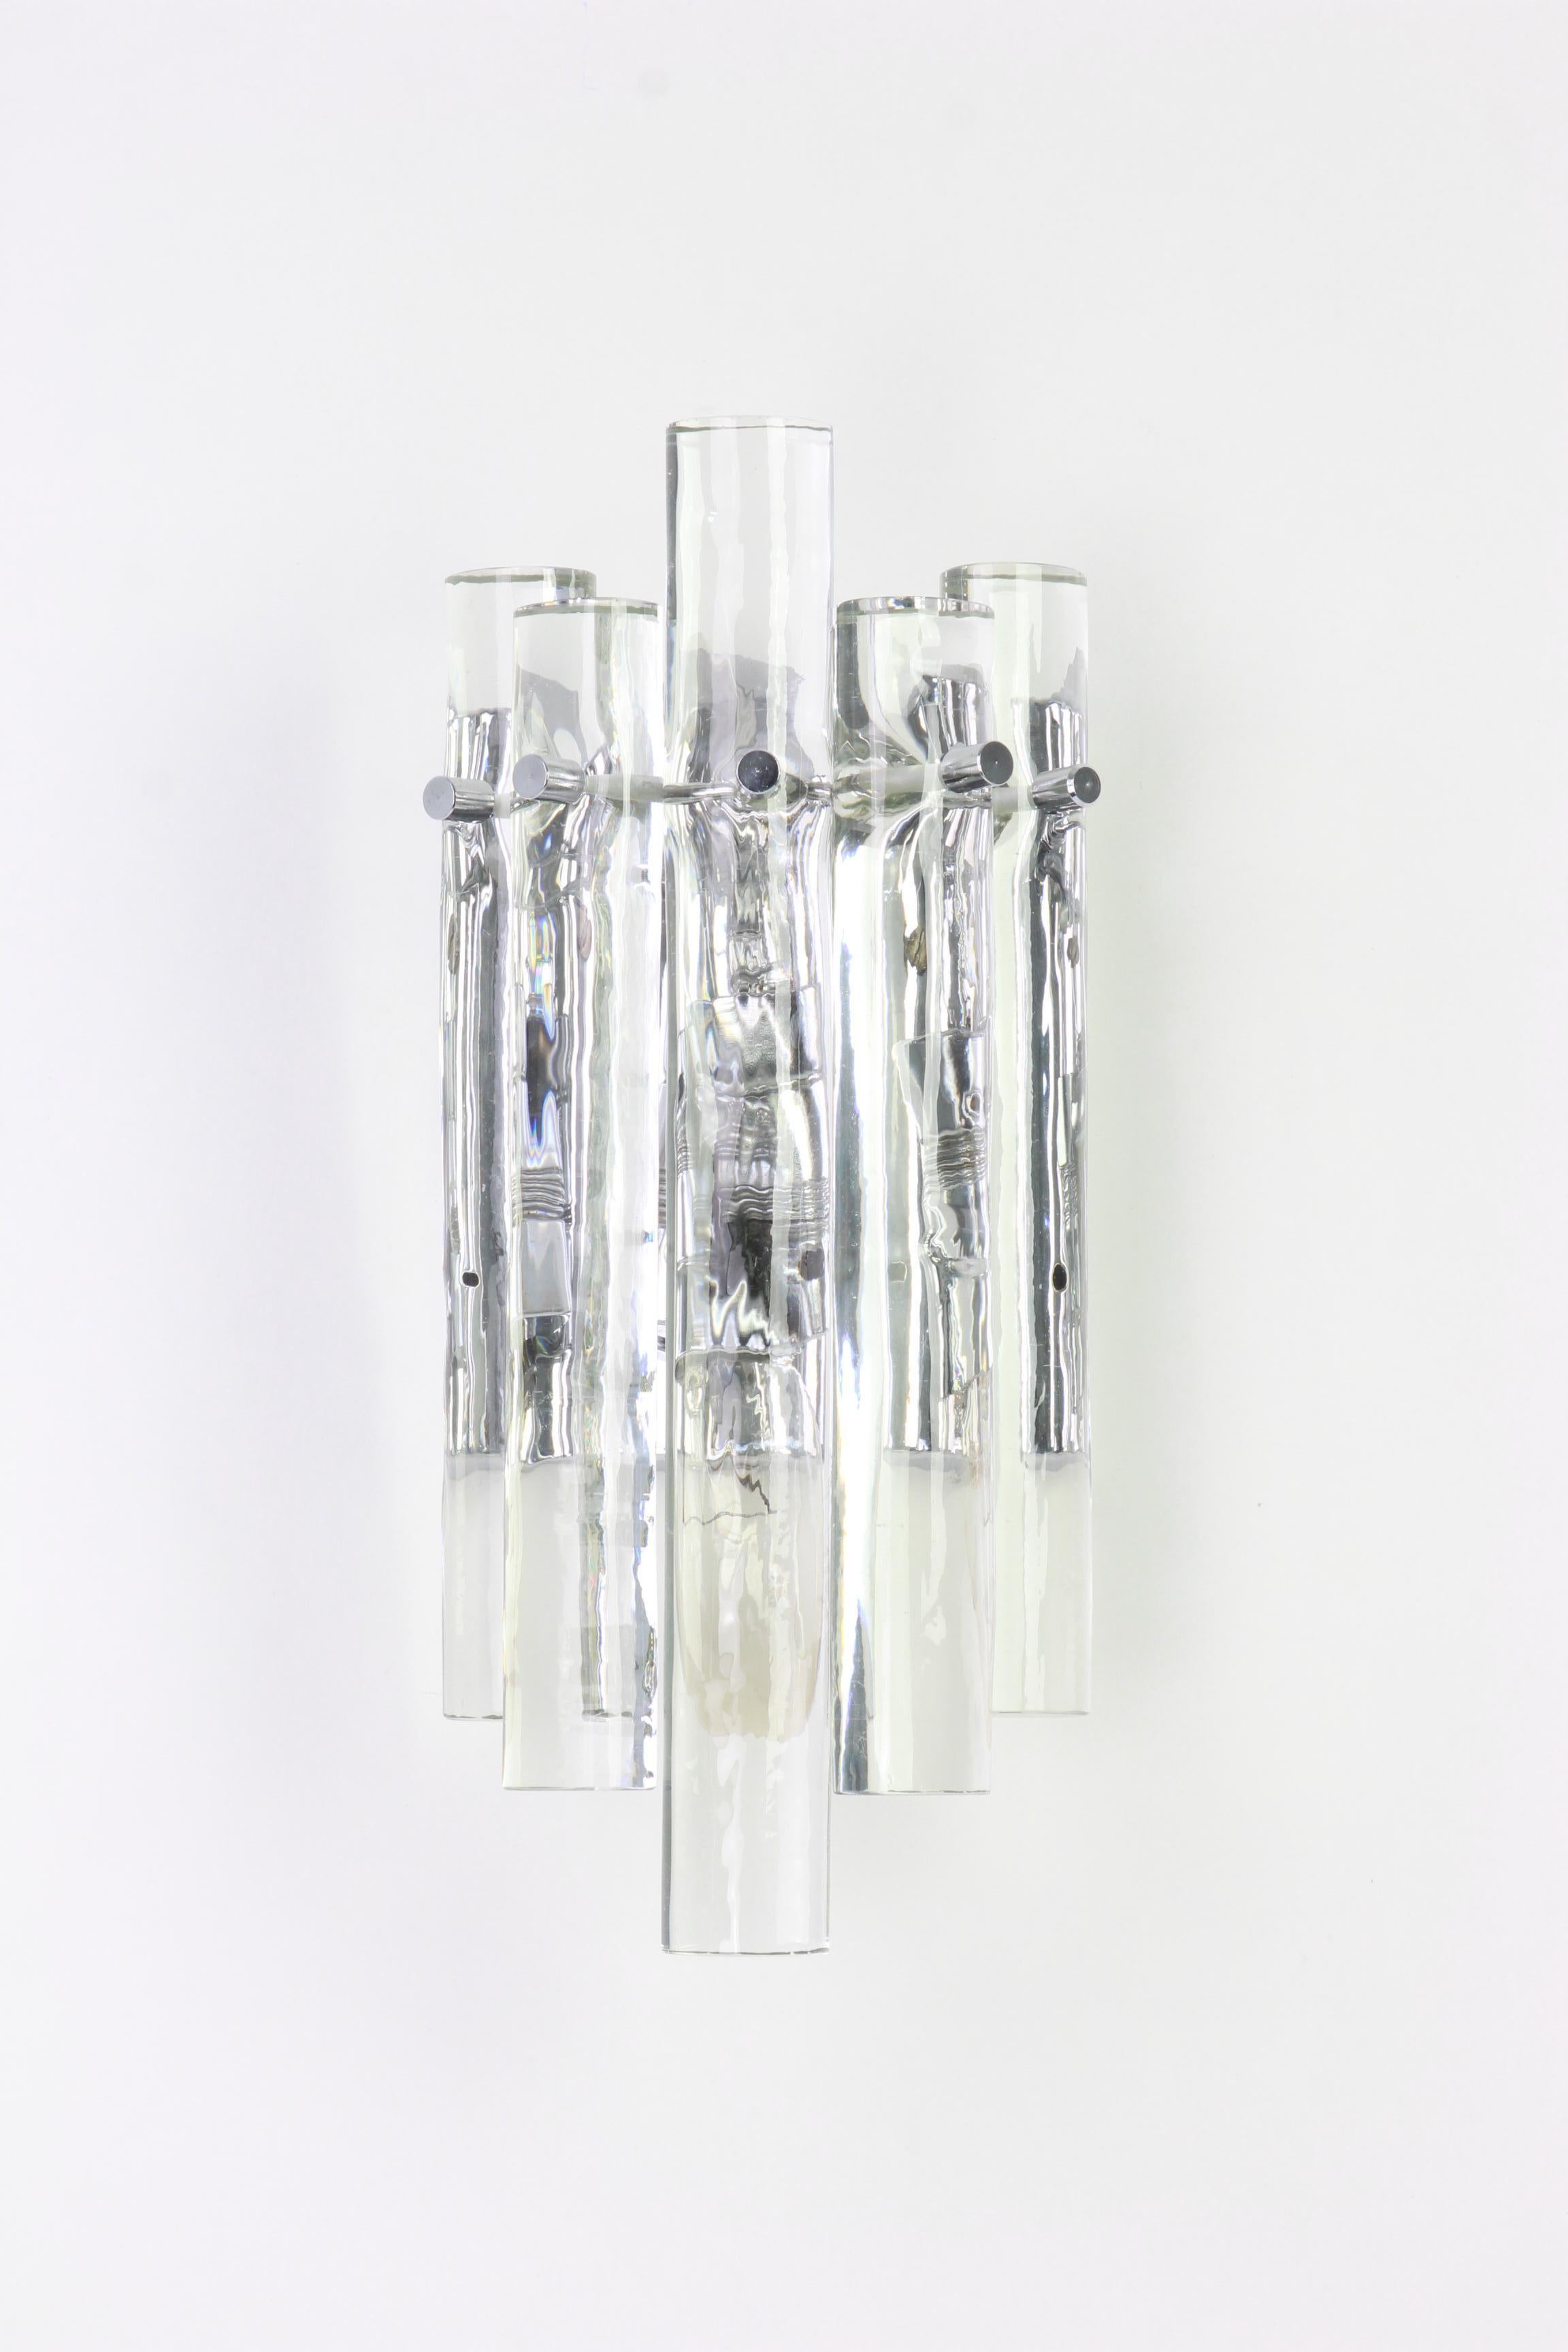 A stunning pair of chrome sconces with crystal glasses, made by Kinkeldey, Germany, circa 1970-1979. It’s composed of crystal glass pieces on a chrome frame.
From the series: Cascade

Best of the 1970s from Germany.

Dimensions:
H 10.6 in. x W